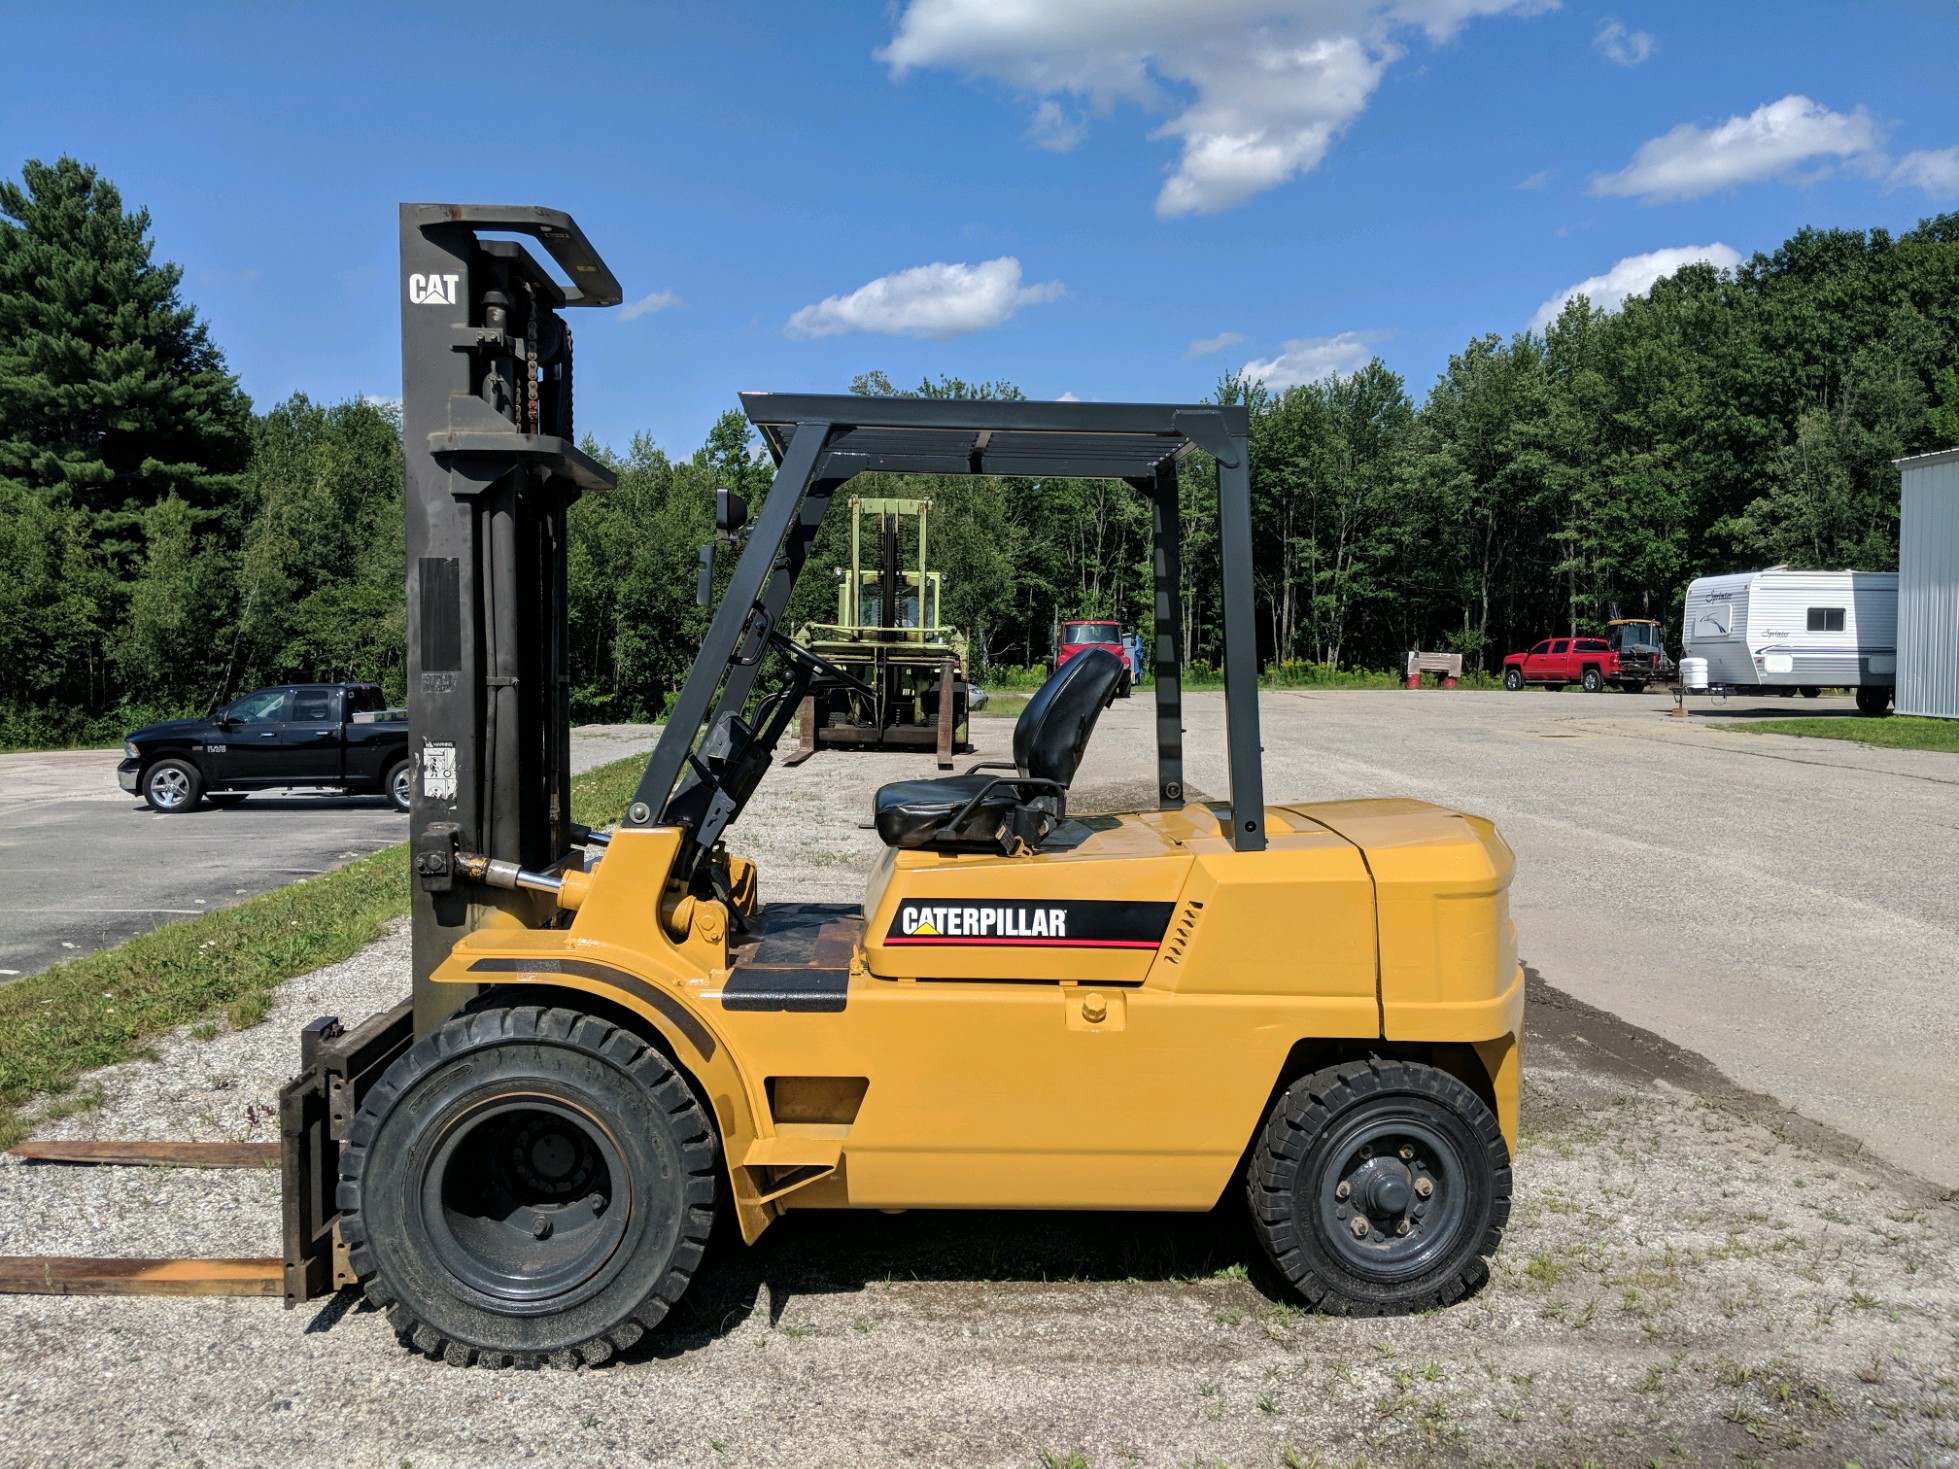 Used Caterpillar Forklift For Sale Maine